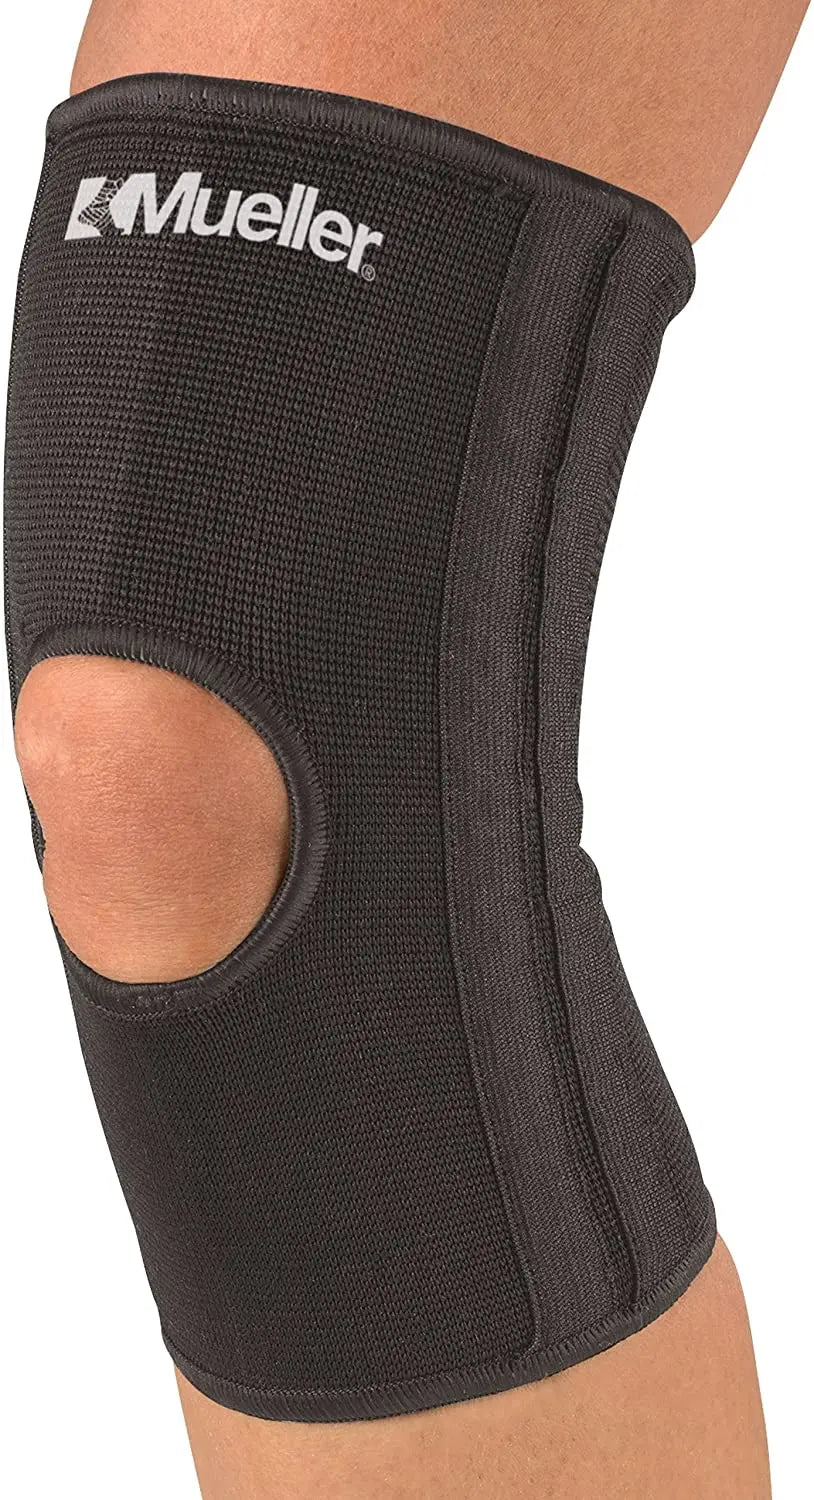 Mueller Elastic Knee Support, Black, X Large - Home Health Store Inc